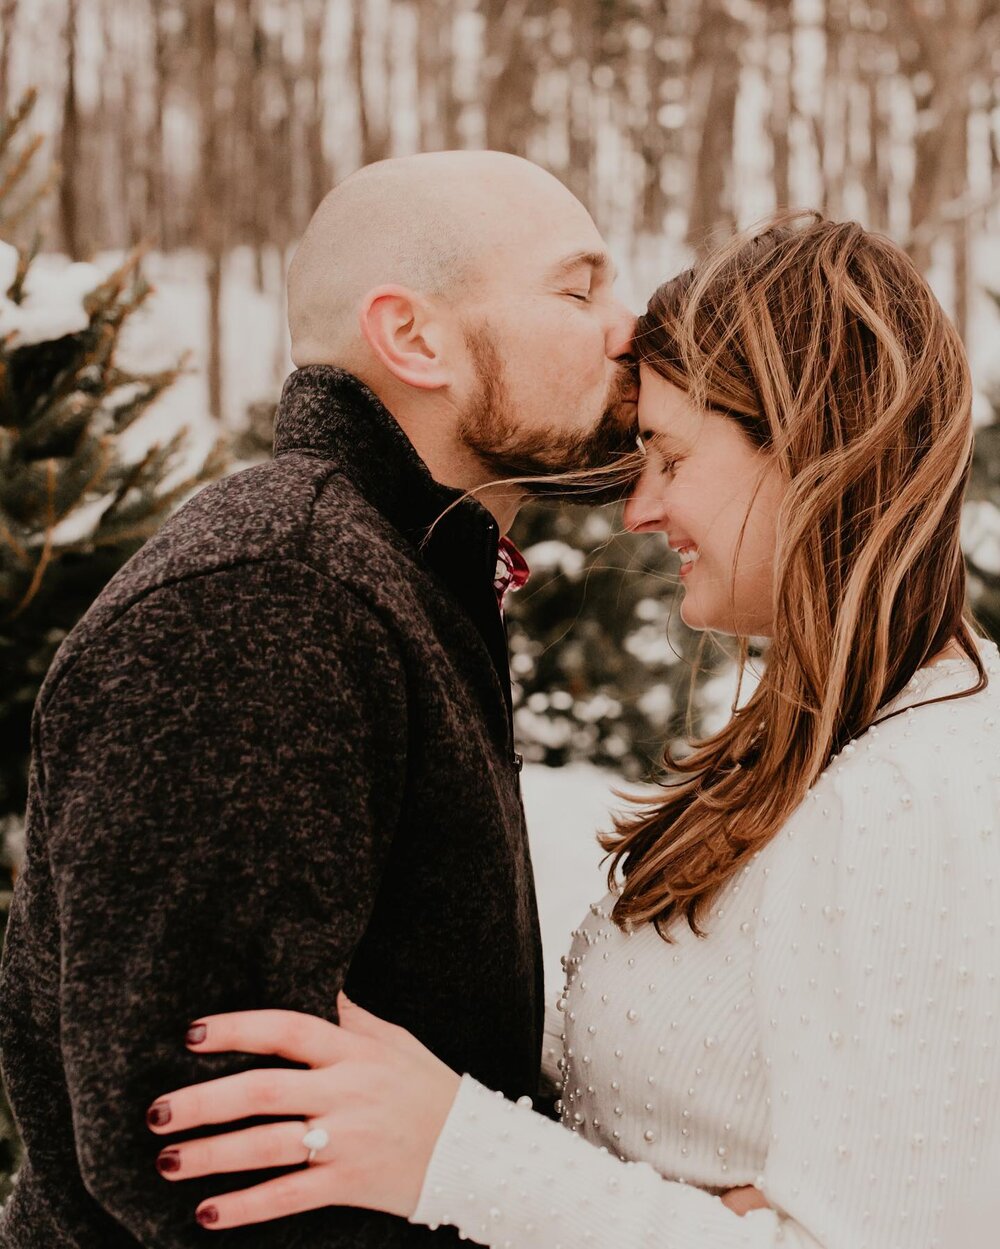 Was it cold? Yes. Was it worth it? Also yes. (Sneak Peek 2/3) &bull;&bull;&bull;&bull;&bull;&bull;&bull;&bull;&bull;&bull;&bull;&bull;&bull;&bull;&bull;&bull;&bull;&bull;&bull;&bull;&bull;&bull;&bull;&bull;&bull;&bull;&bull;&bull;&bull;&bull;&bull;&bull;&bull;&bull;&bull;&bull;&bull;&bull;&bull;&bull;&bull;&bull;&bull;&bull;&bull;&bull;&bull;&bull;&bull;&bull;&bull;&bull;&bull;
#cle #cleveland #clevelandwedding #clevelandweddingphotographer #thisiscle #neoweddingphotographer  #neohioweddingphotography #clevelandweddingphotography #weddingphotography #wedding  #love #engagementphotos #engaged #clevelandengagementphotographer #amandacelisphotography #weddingwirecleveland #theknotcleveland